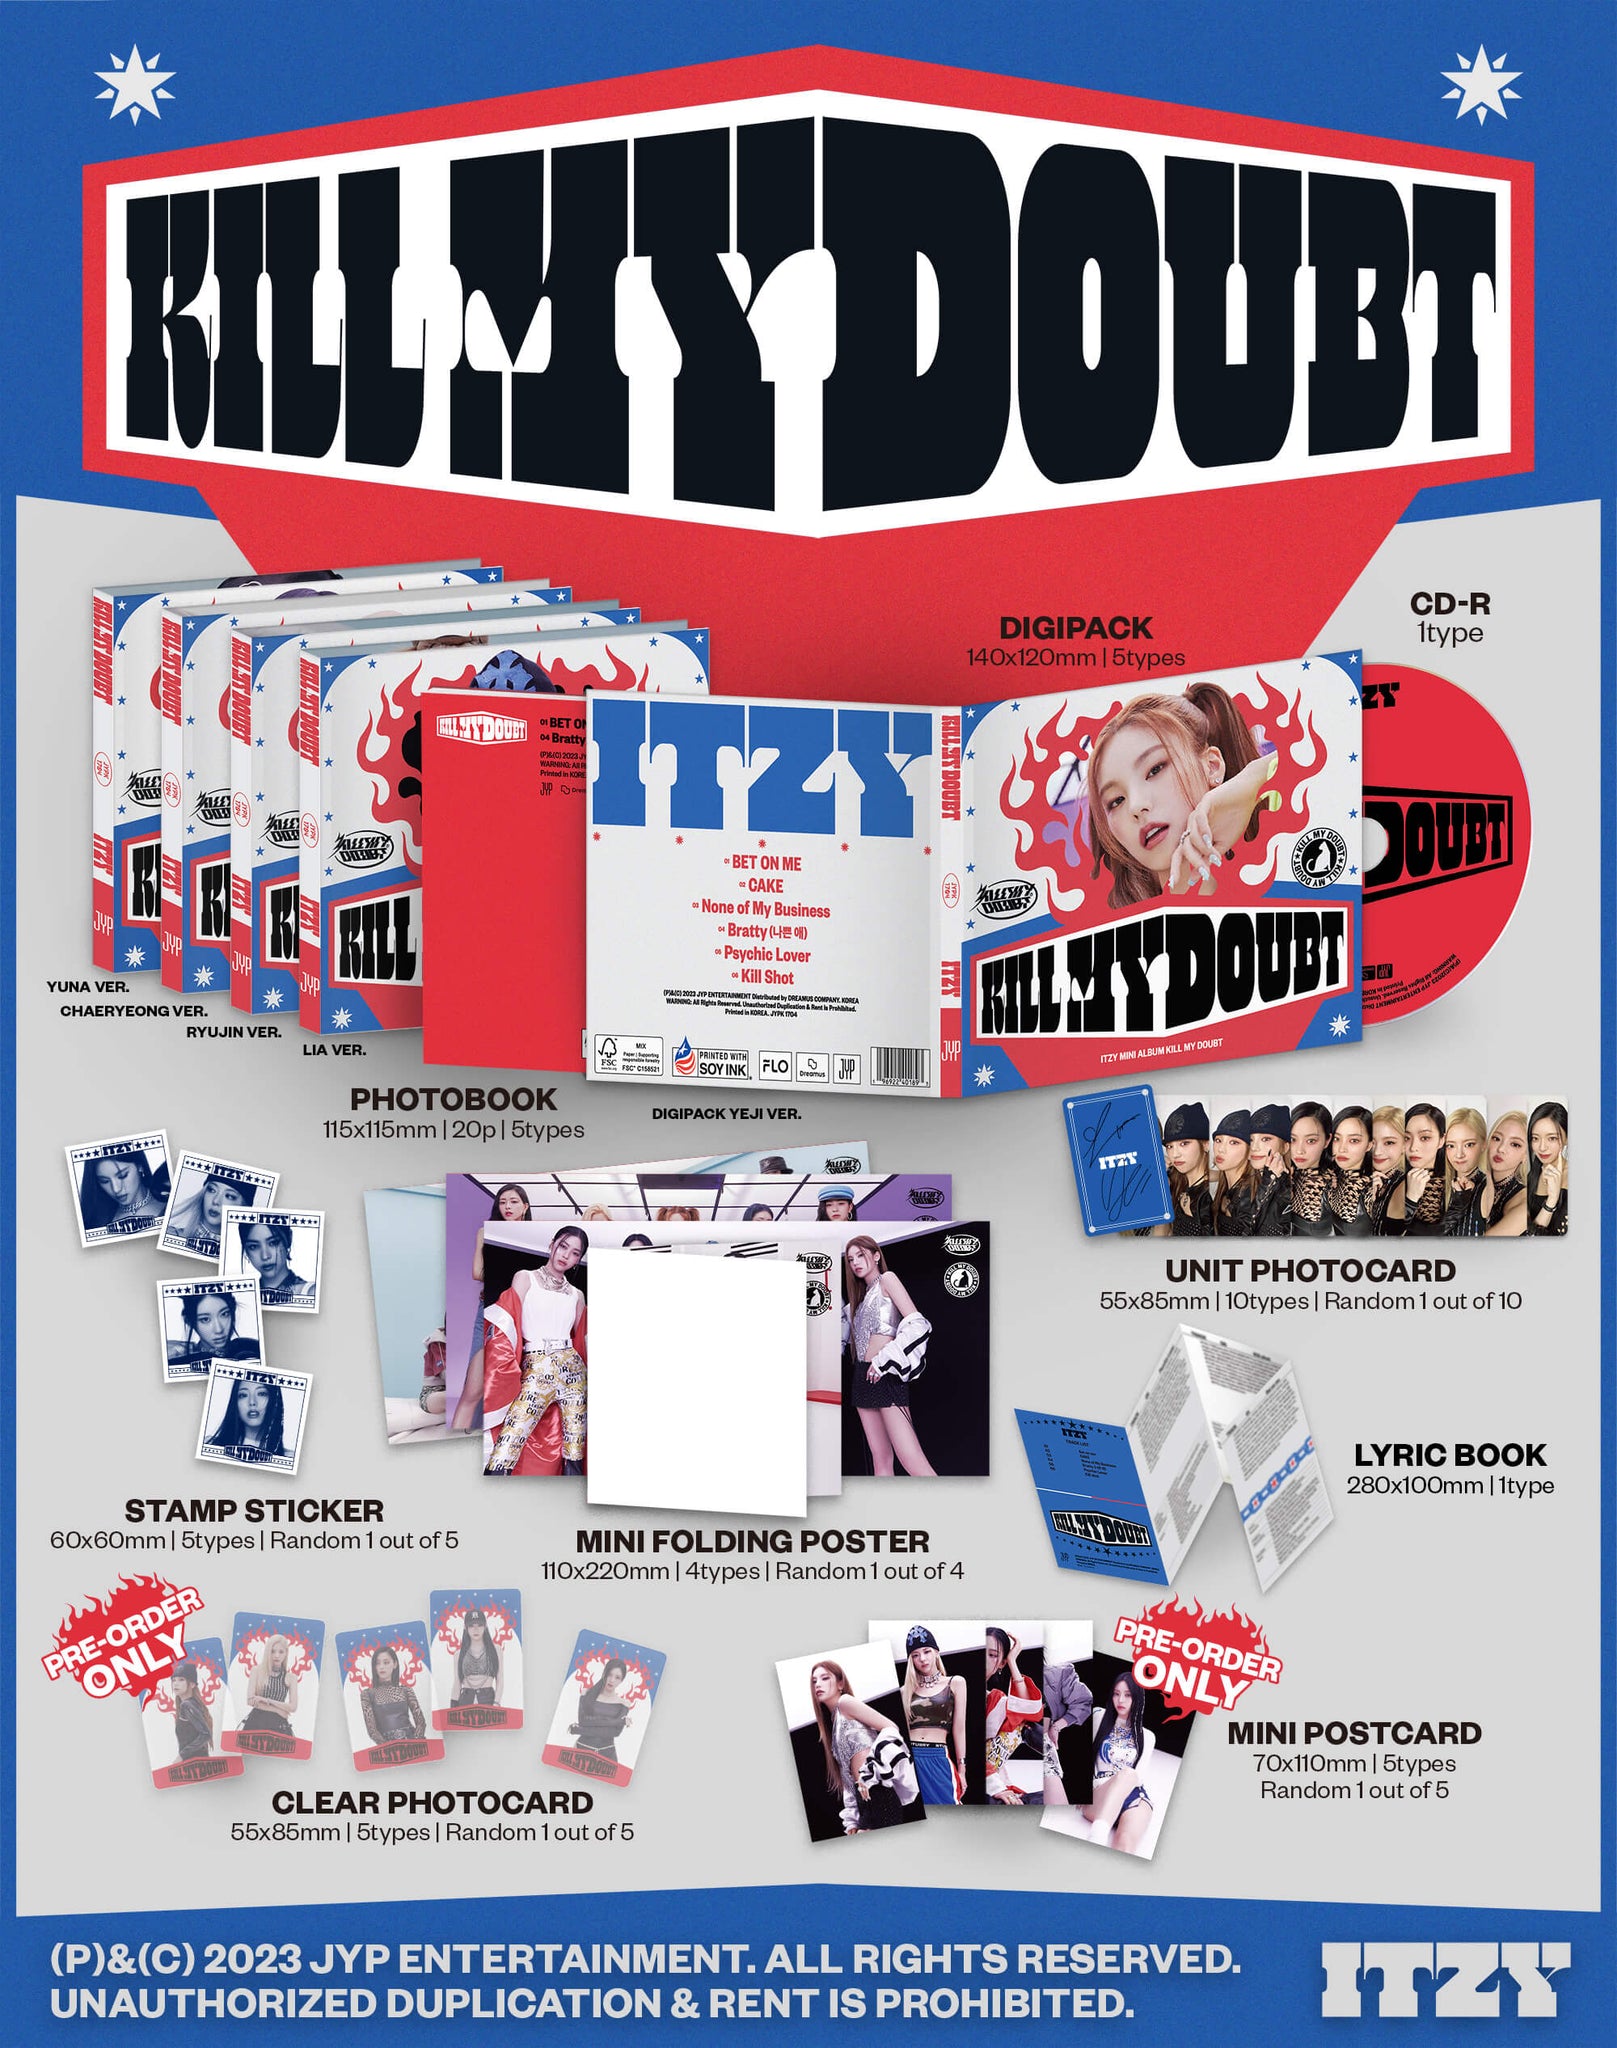 ITZY KILL MY DOUBT - Digipack Version Inclusions Digipack Photobook CD Stamp Sticker Mini Folding Poster Lyric Book Unit Photocard Pre-order Only Clear Photocard Mini Postcard